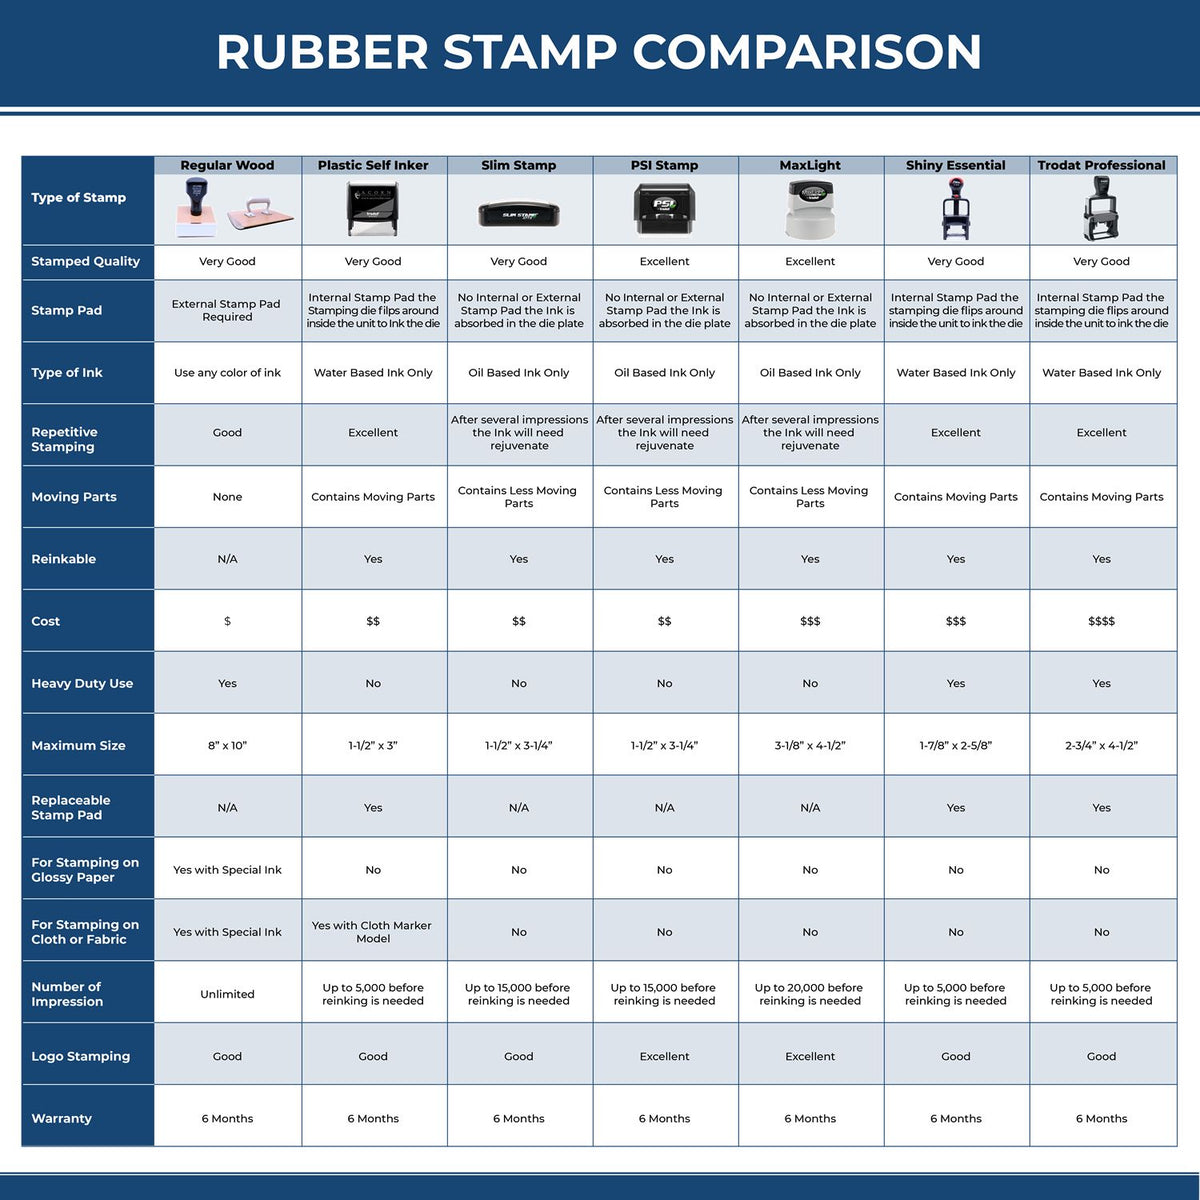 A comparison chart for the different types of mount models available for the Super Slim Minnesota Notary Public Stamp.